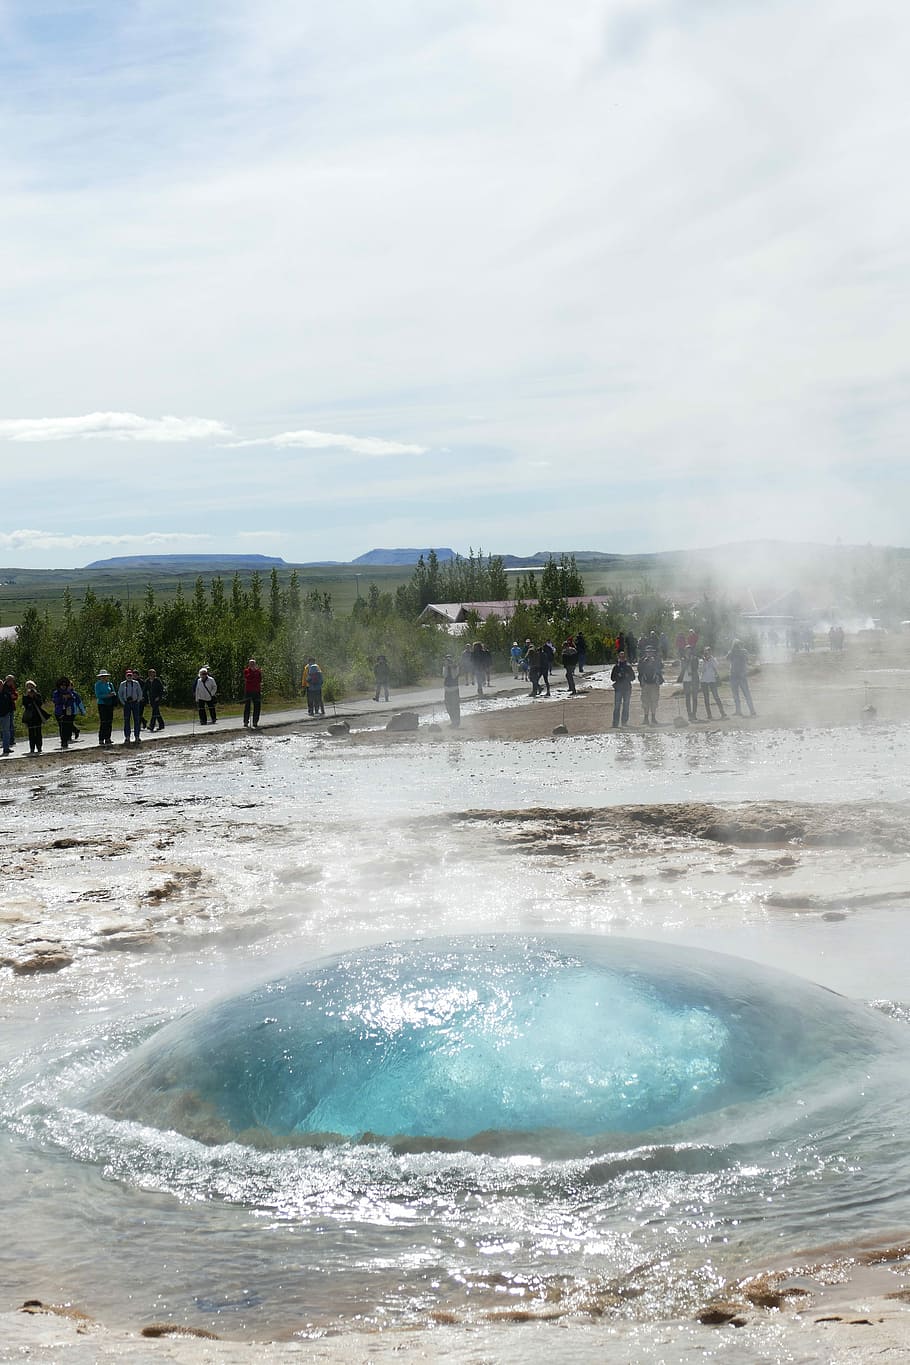 Geyser, Iceland, Fountain, Landscape, water, nature, strokkur, boiling water, places of interest, steam